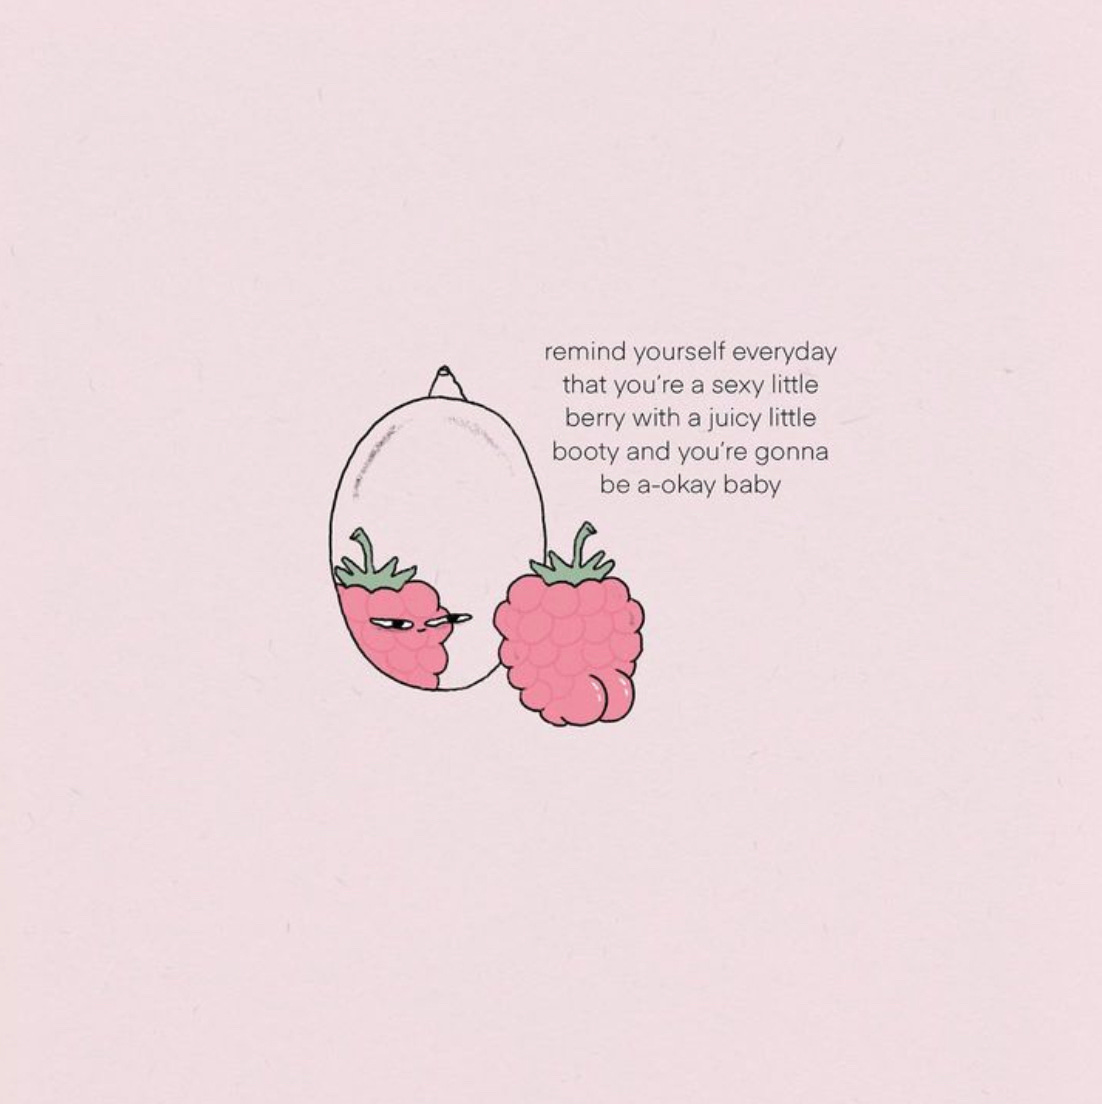 Illustration of a berry looking in the mirror giving itself positive affirmations